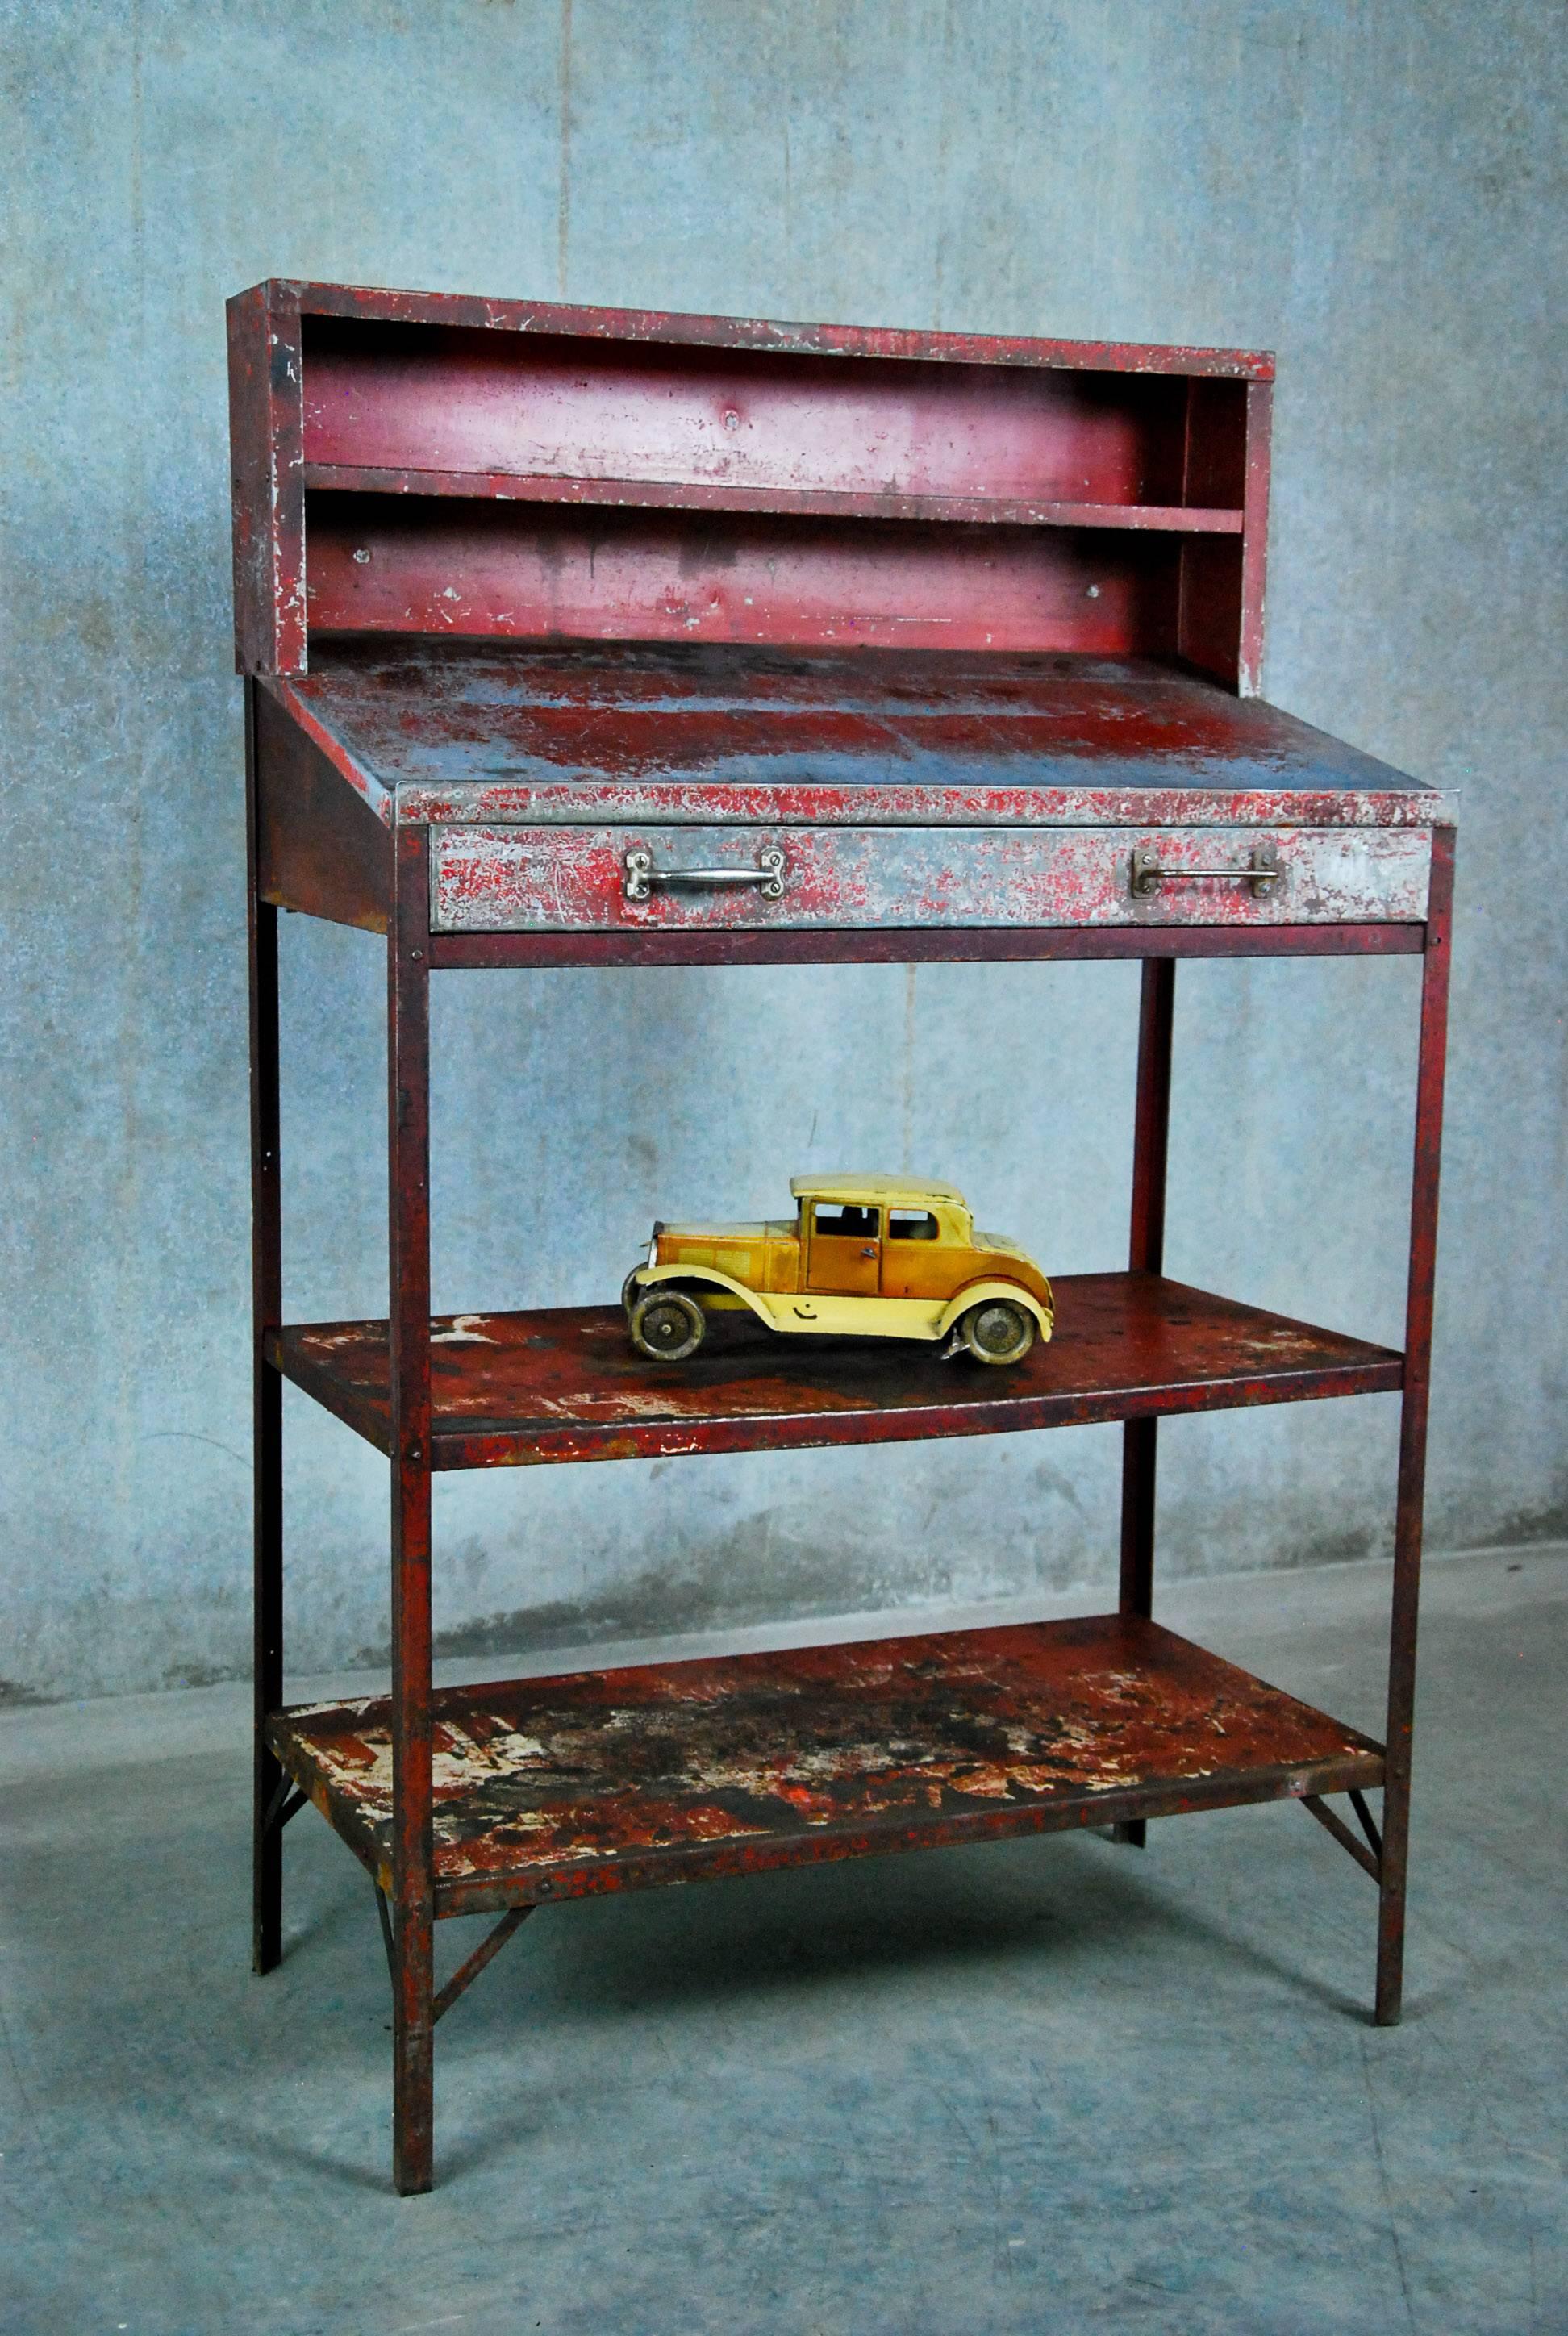 Great paint on this original factory foreman's desk. Lightweight, with multiple shelves,  it makes a great catch all or hostess stand. Found in a factory outside Buffalo.